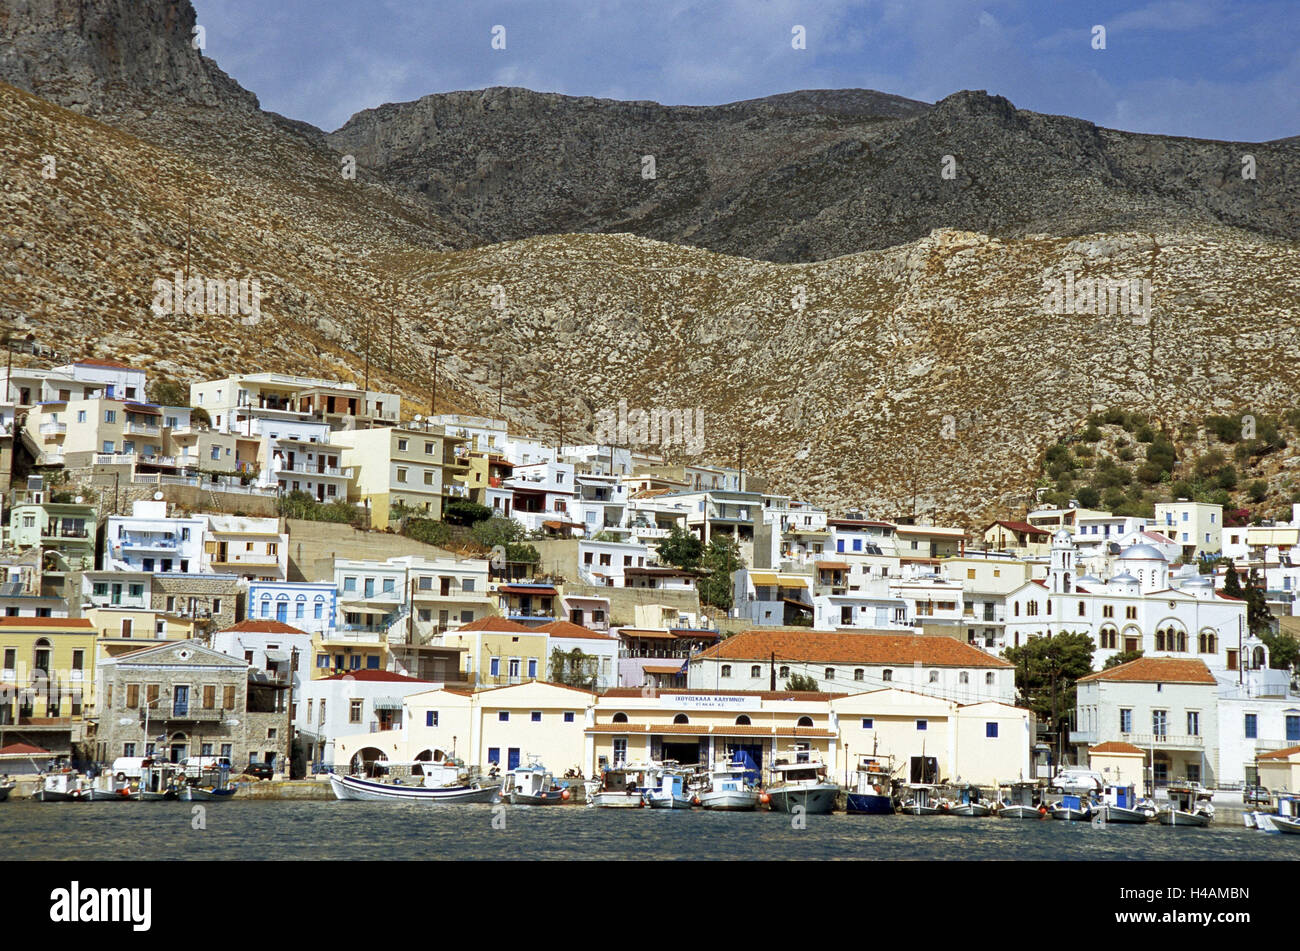 Greece, Dodekanes, island Kalymnos, coast, Pothia, town view, harbour, promenade, boots, mountains, sea, island group, Mediterranean island, the Aegean Sea, seashore, coastal town, island capital, port, bay, architecture, houses, brightly, harbour promenade, fish auction hall, fishing boats, mountains, scanty, two-pronged mattock, Stock Photo